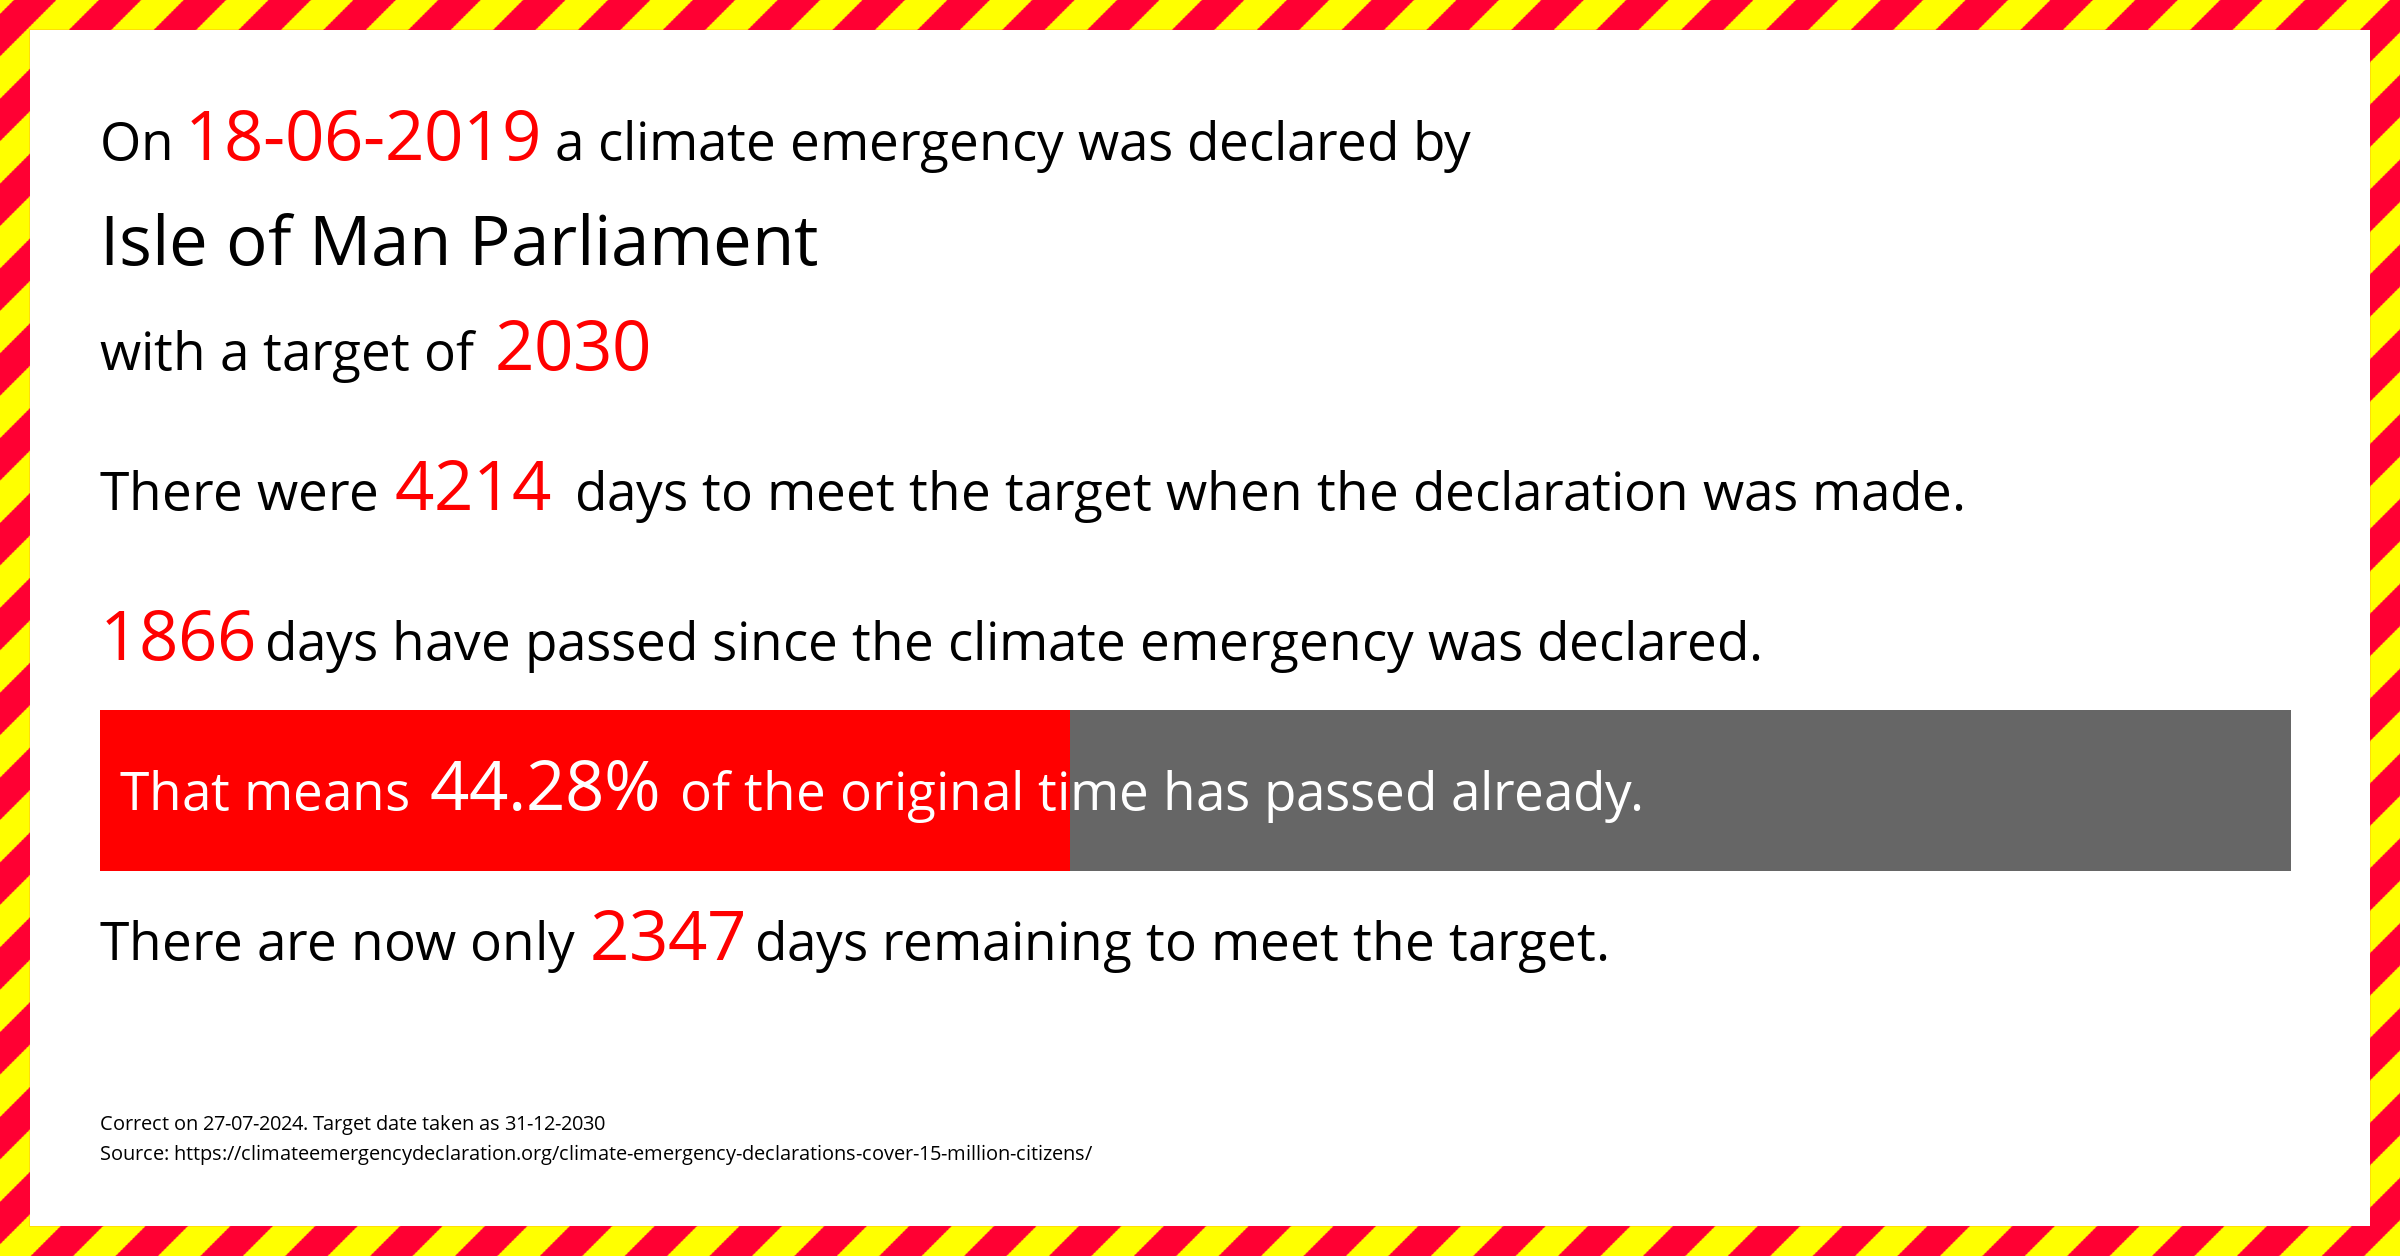 Isle of Man Parliament declared a Climate emergency on Tuesday 18th June 2019, with a target of 2030.